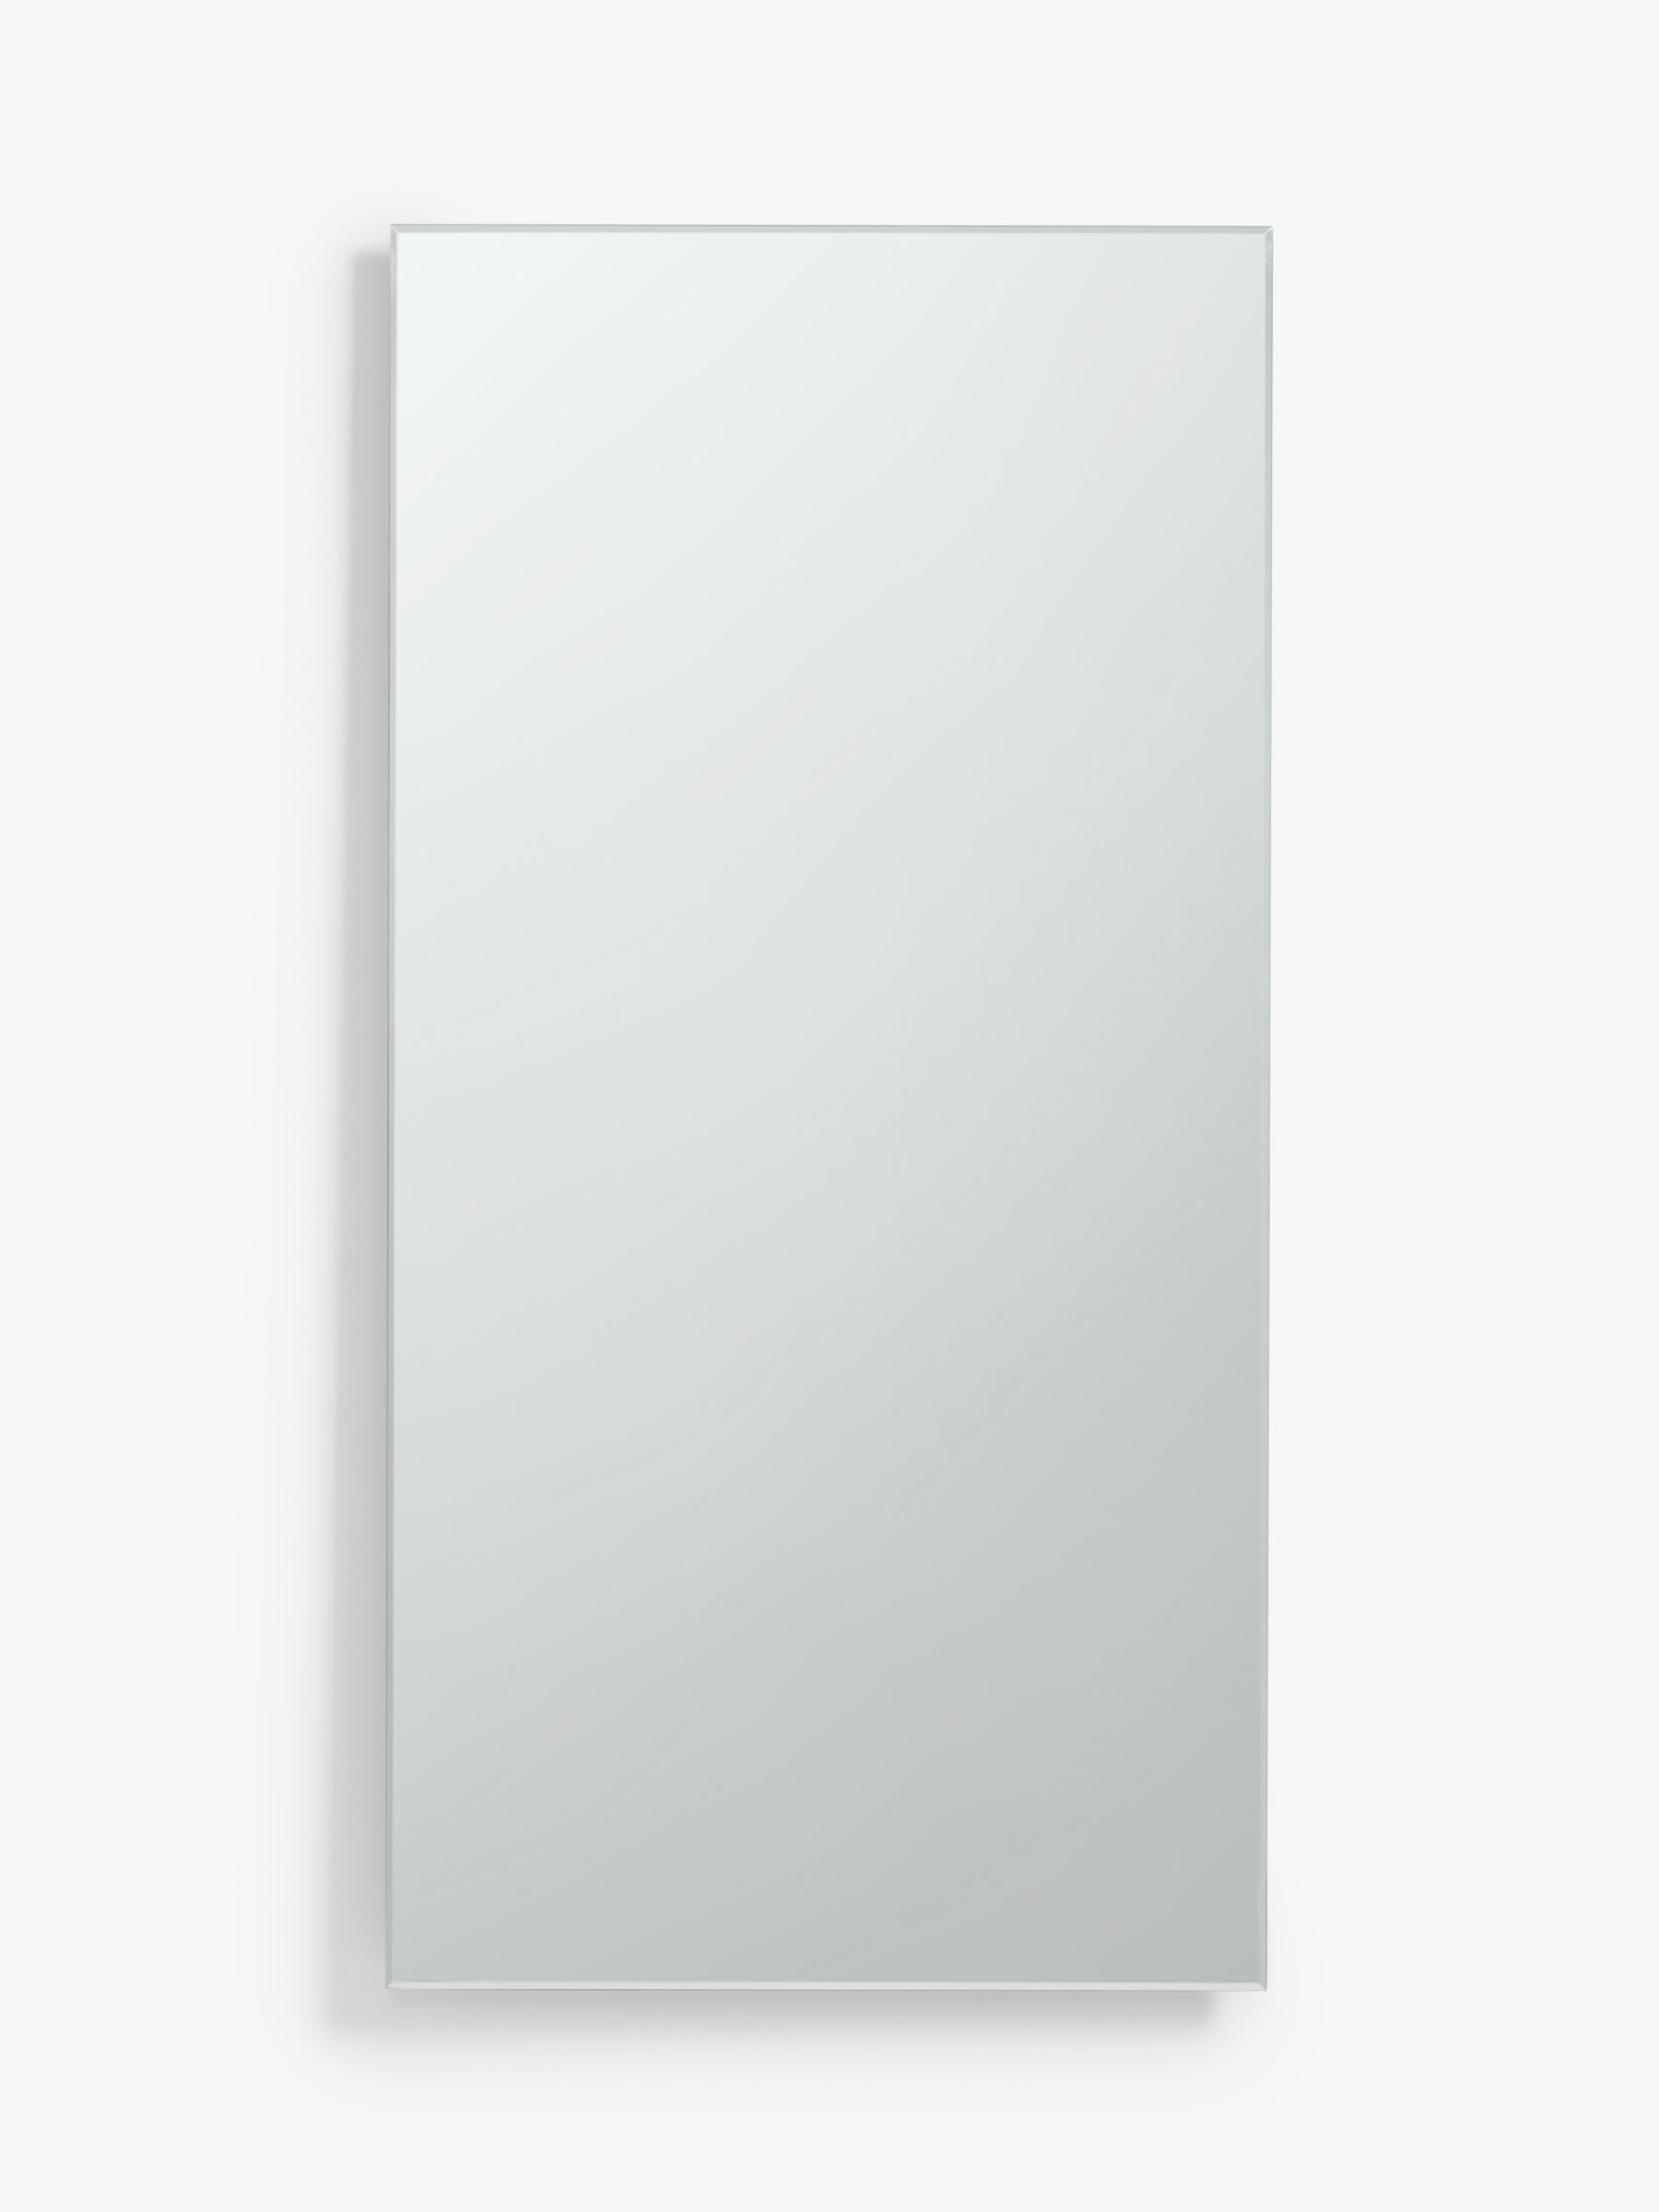 Photo of John lewis double mirrored bathroom cabinet silver